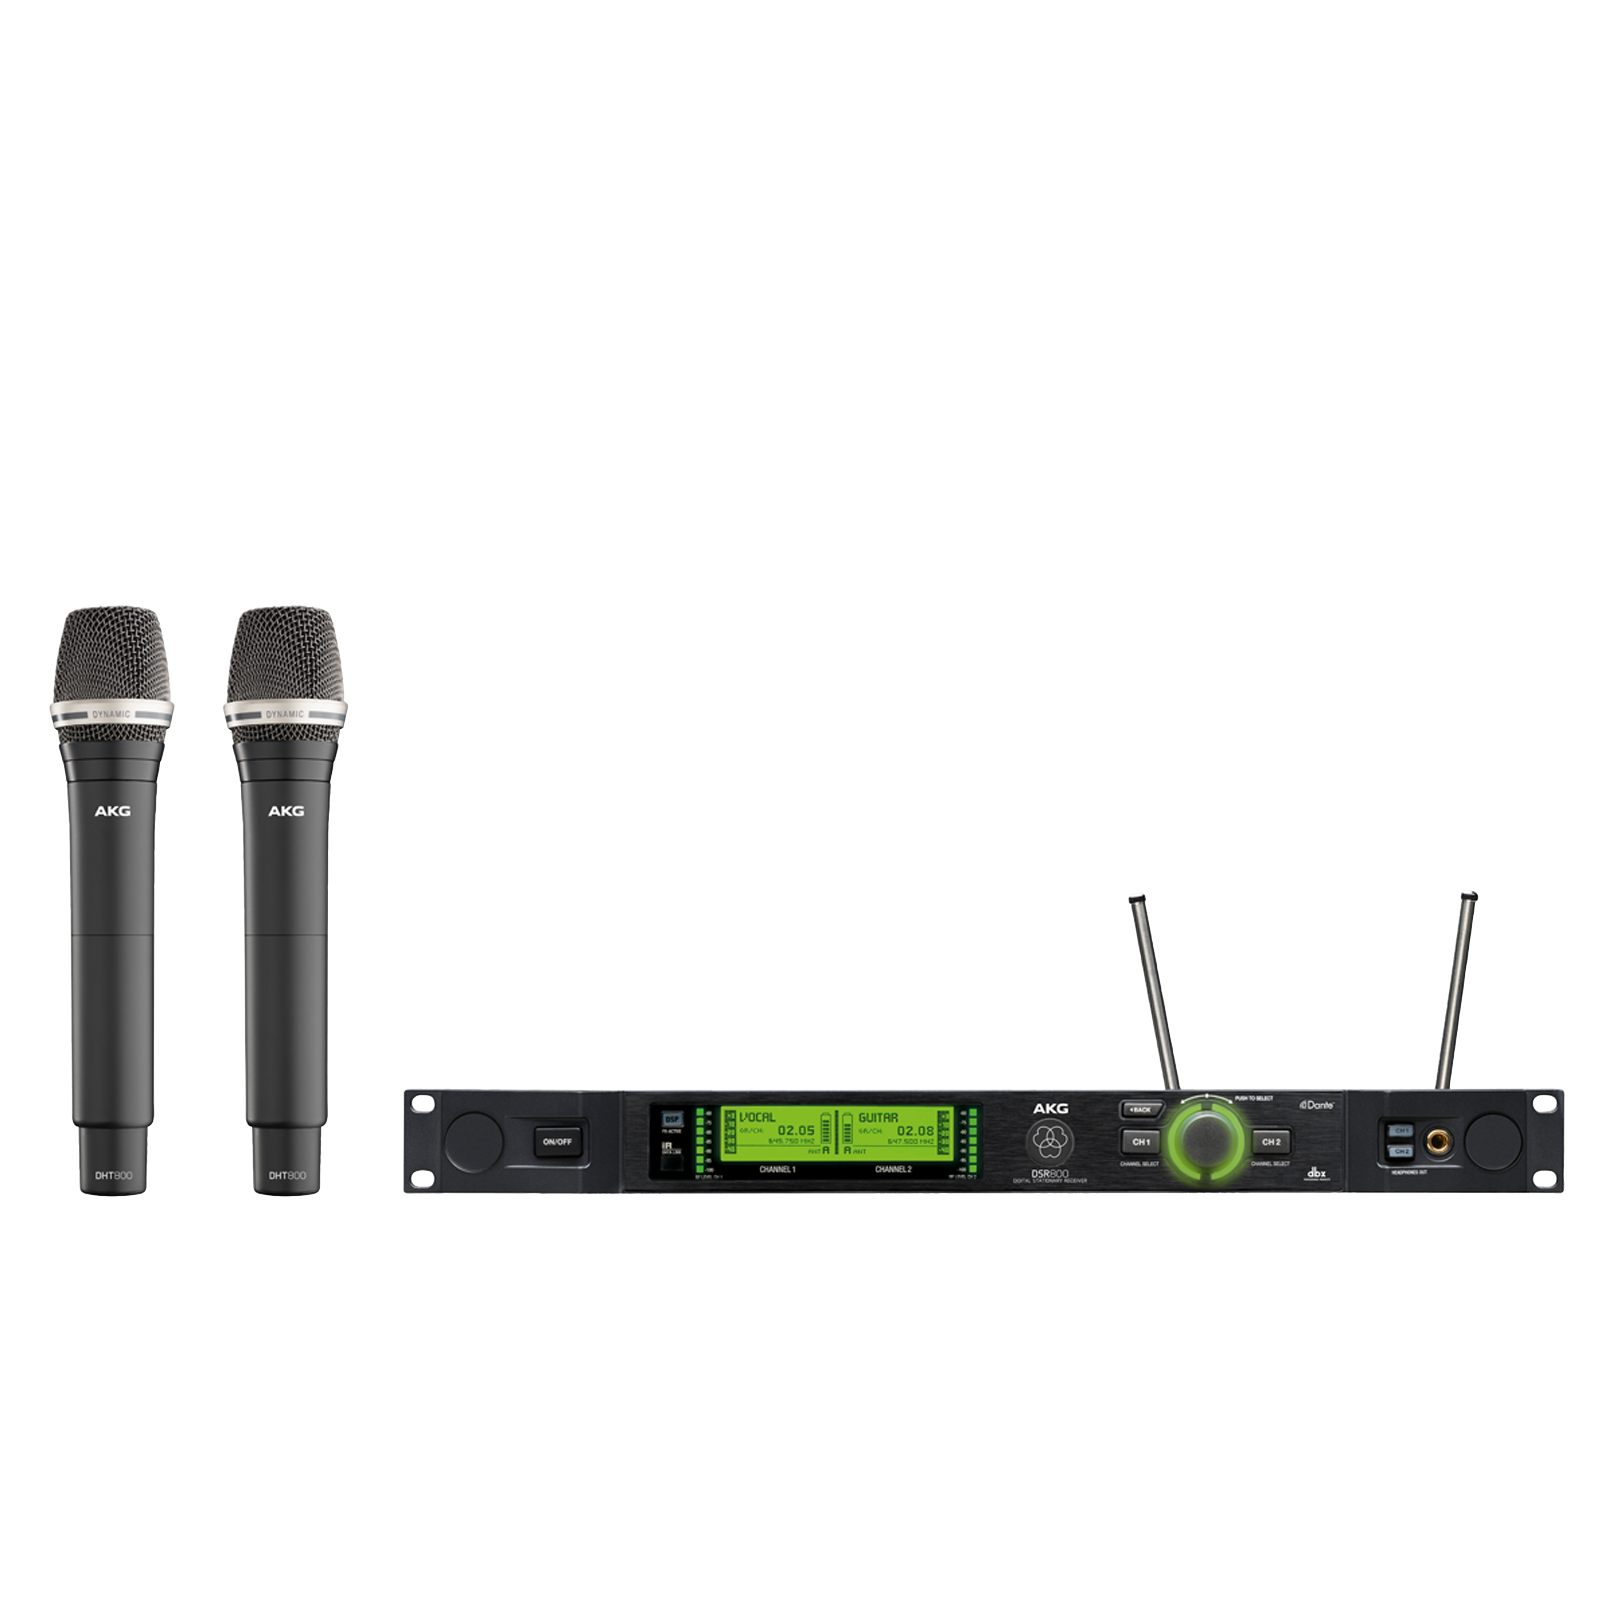 DMS800 Vocal Set D7 - Black - Reference digital wireless microphone system - Hero